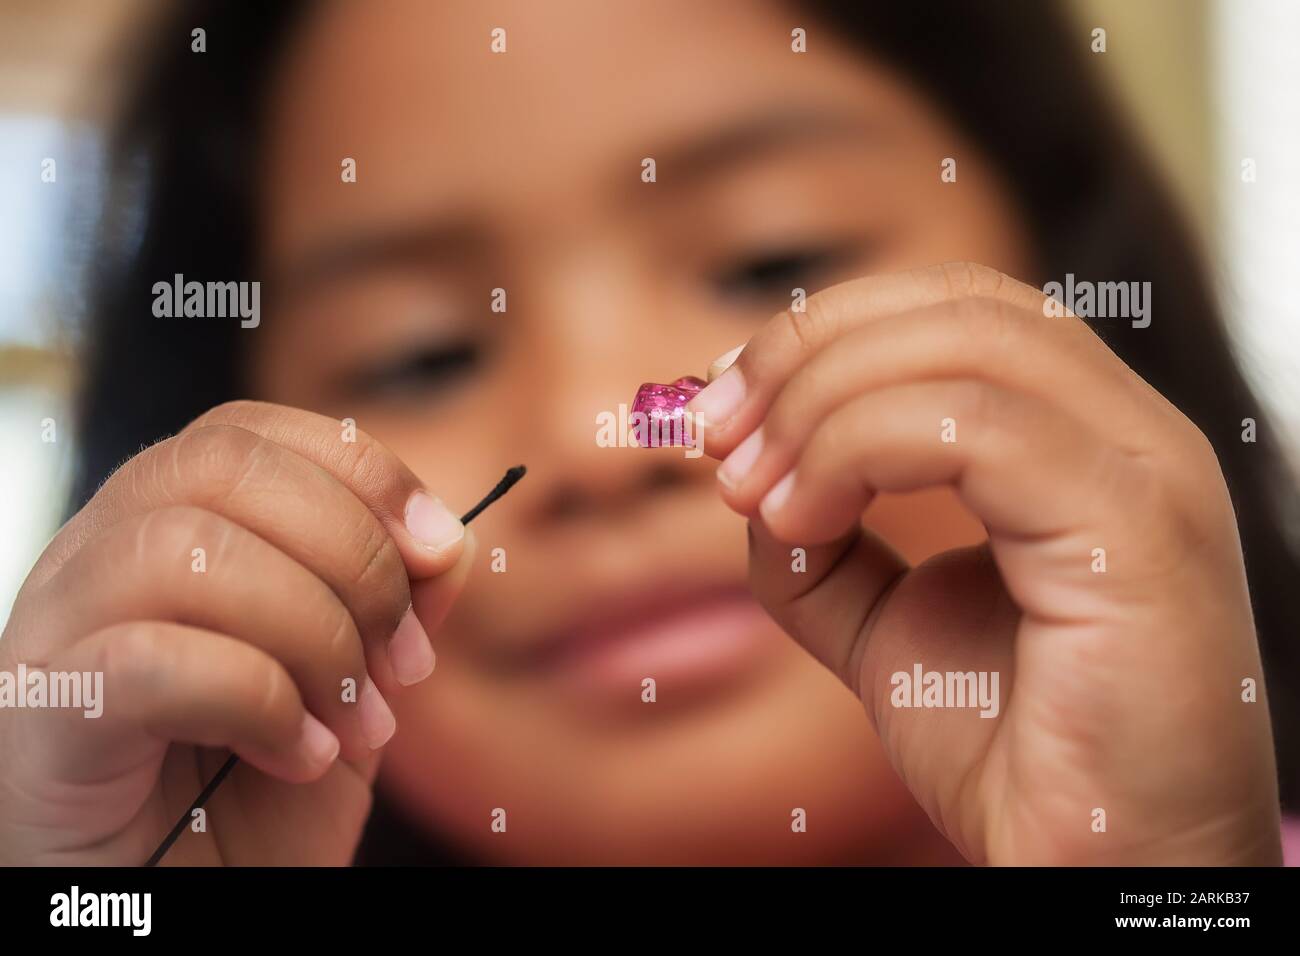 A little girl improving visual motor skills or hand and eye co-ordination when threading beads. Stock Photo